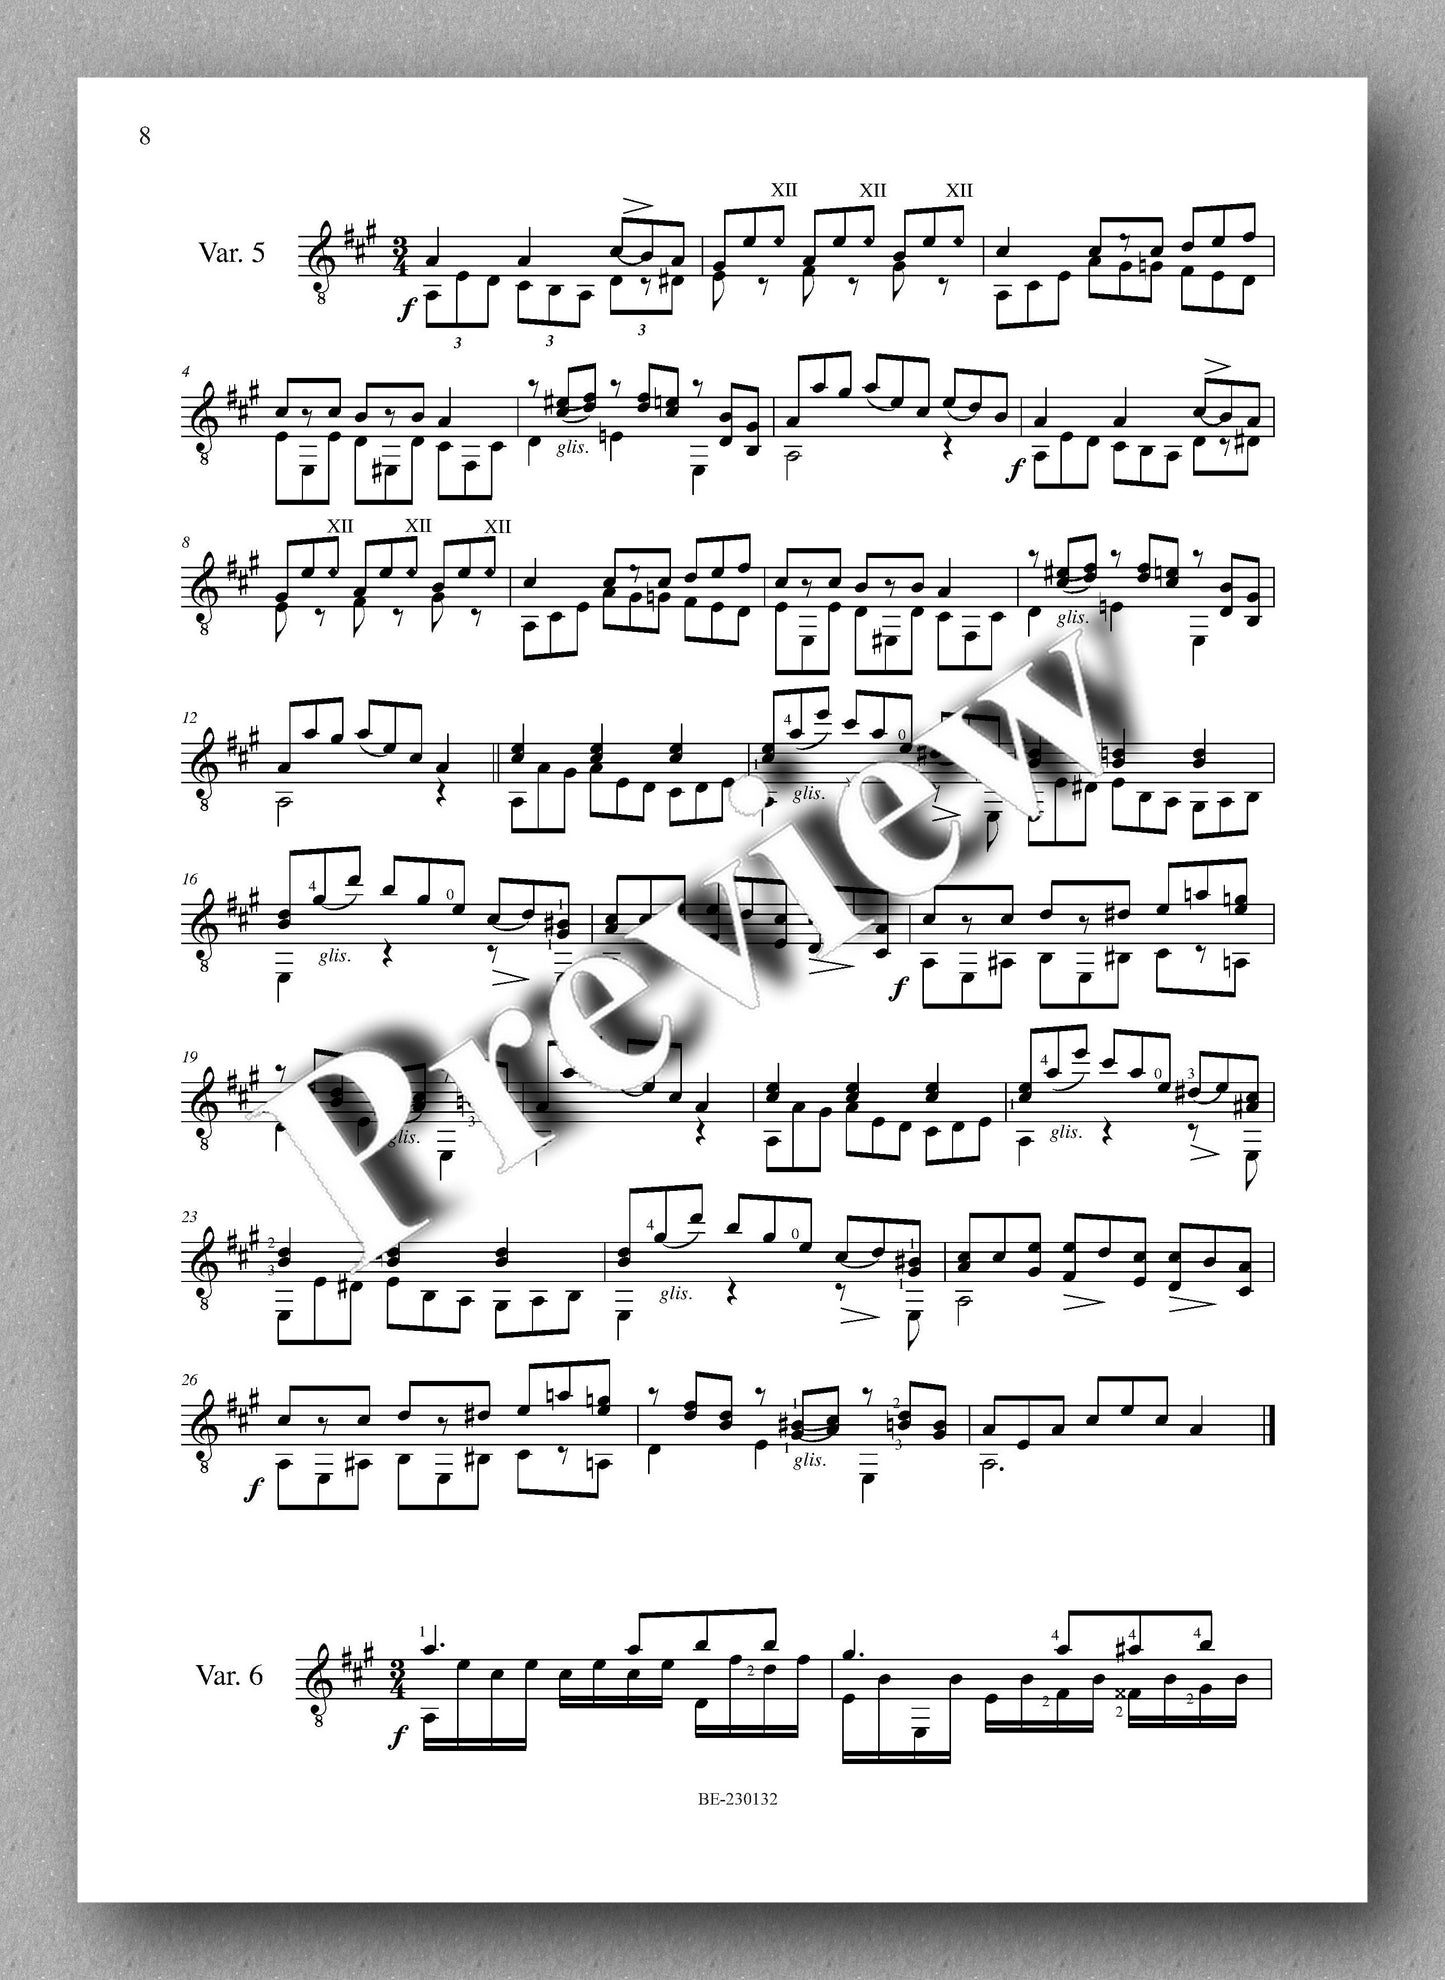 Molino, Collected Works for Guitar Solo, Vol. 44 - preview of the music score 2